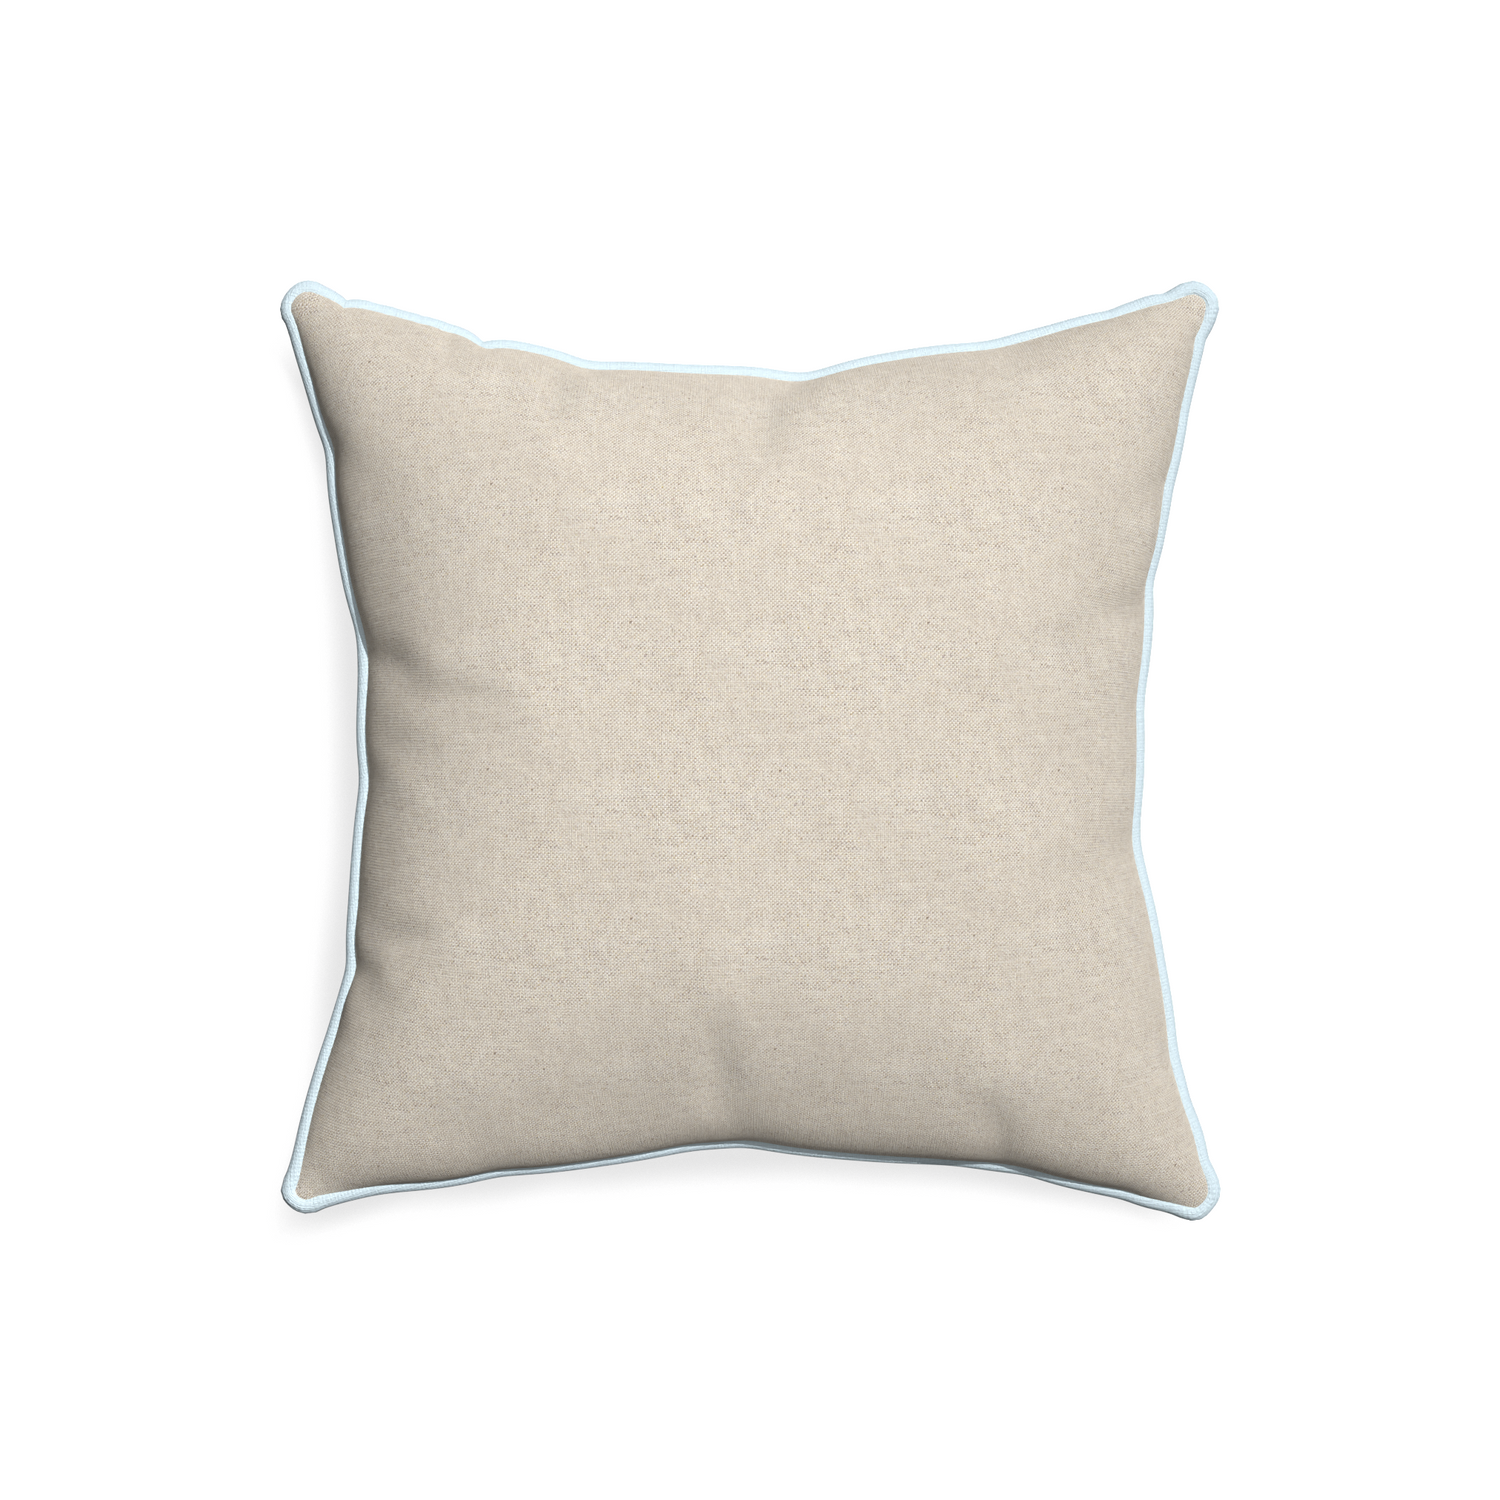 20-square oat custom light brownpillow with powder piping on white background